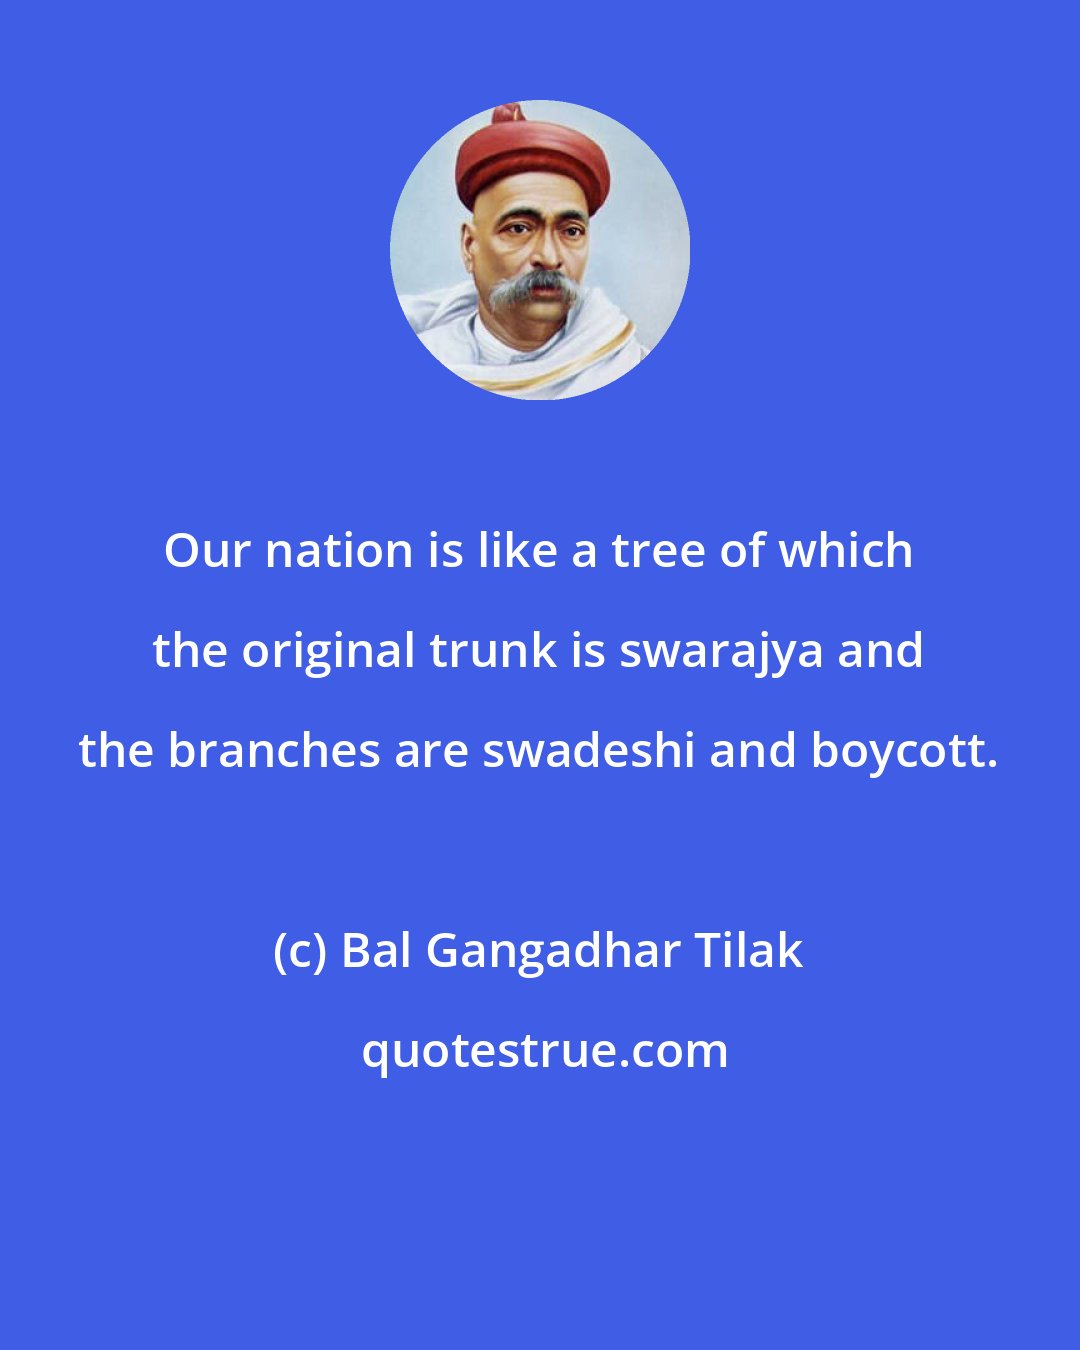 Bal Gangadhar Tilak: Our nation is like a tree of which the original trunk is swarajya and the branches are swadeshi and boycott.